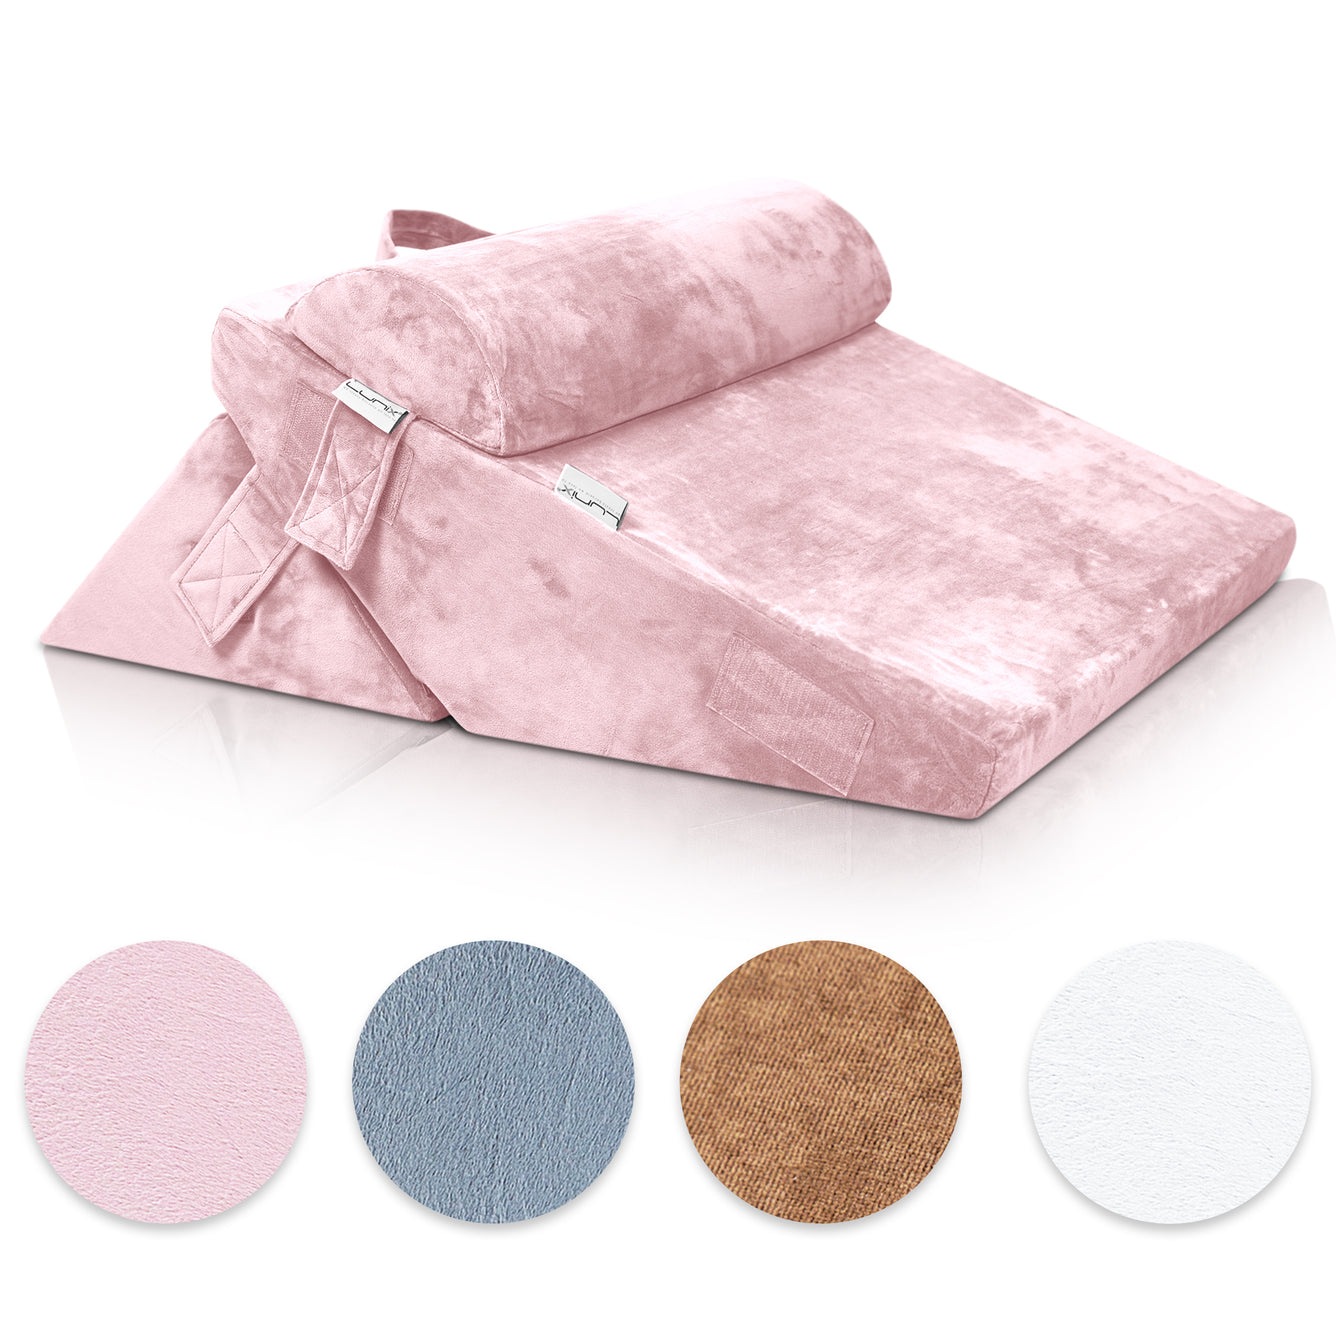 Lunix 3pcs Wedge Pillow Cover Set Only for LX6, Pink Plush, Pillows and Foam not Included